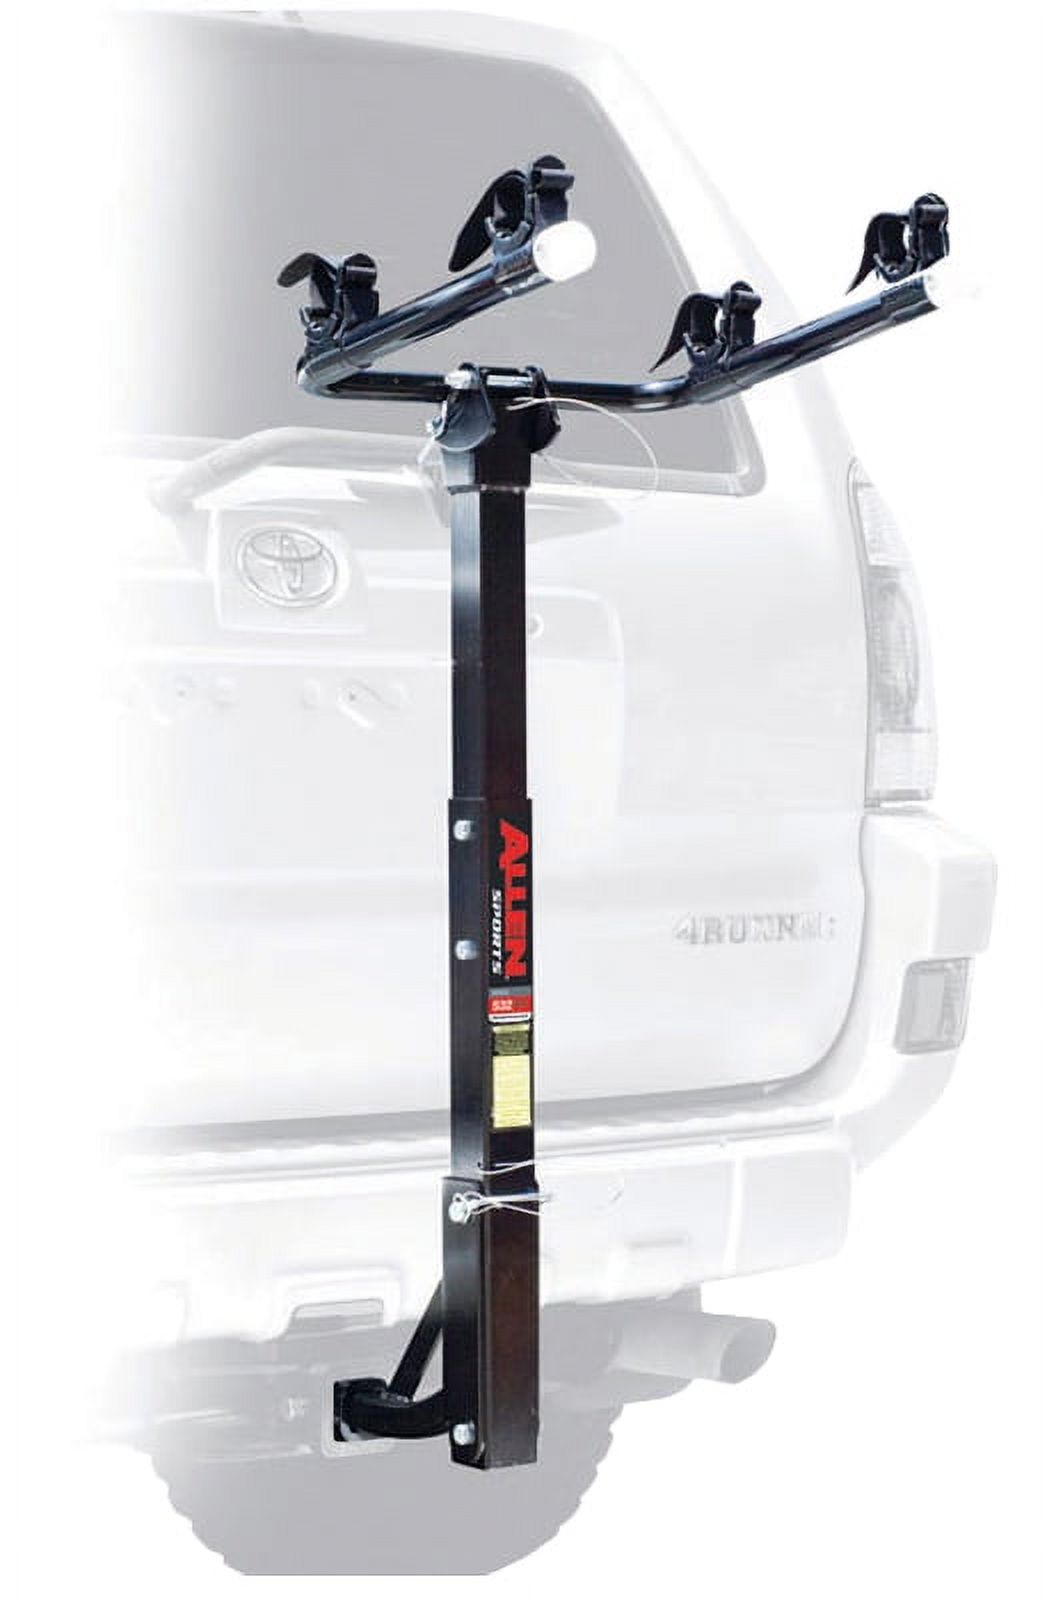 Allen Sports 522RR Deluxe Hitch Mounted 2-Bike Carrier for 1 1/4" and 2" Receiver Hitches - image 2 of 3